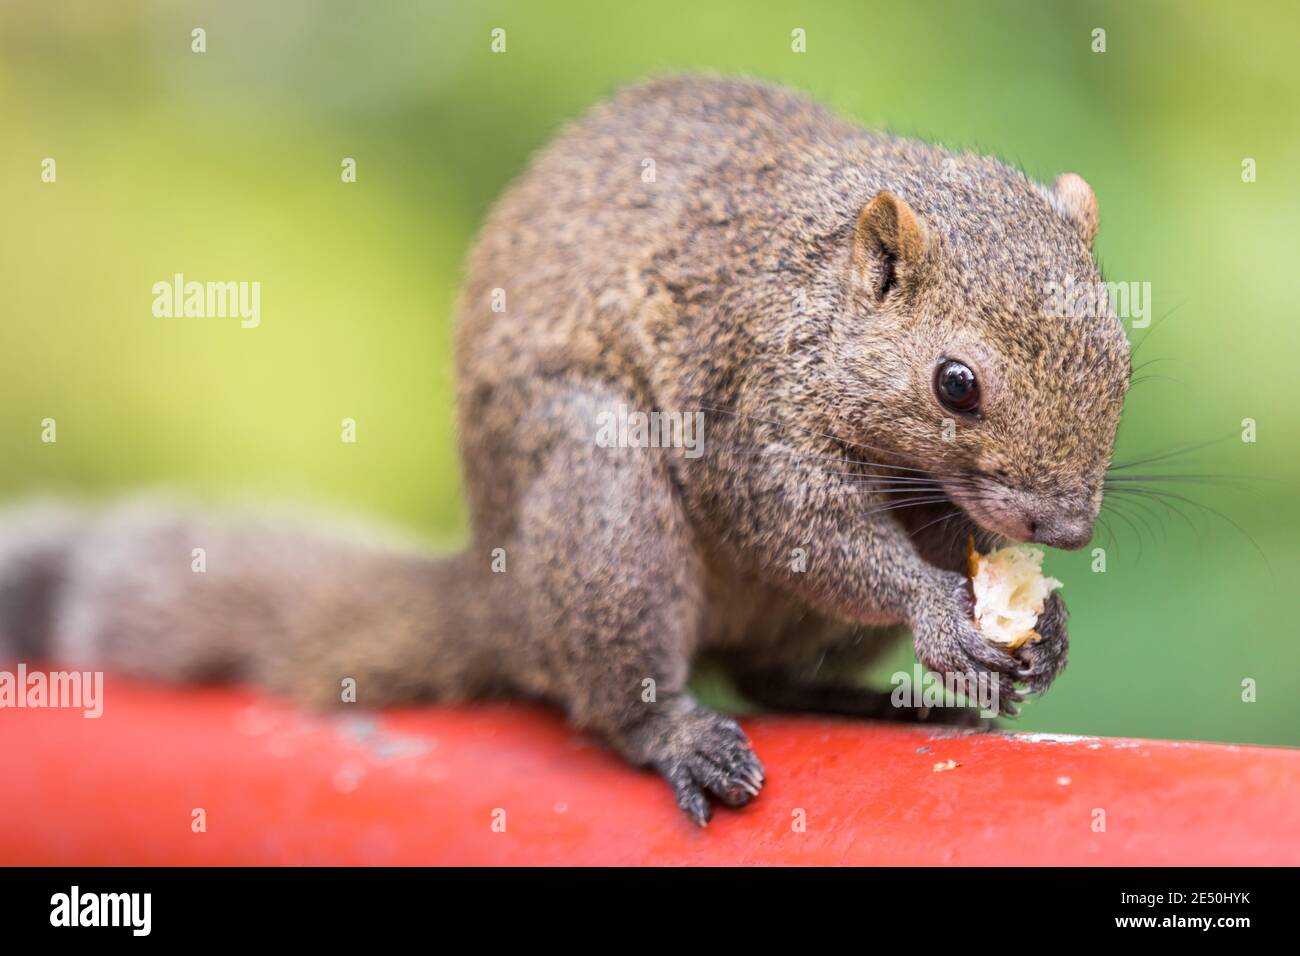 Close up of a grey squirrel standing on a red wooden pole and crunching on bread morsel, against a green bokeh background Stock Photo